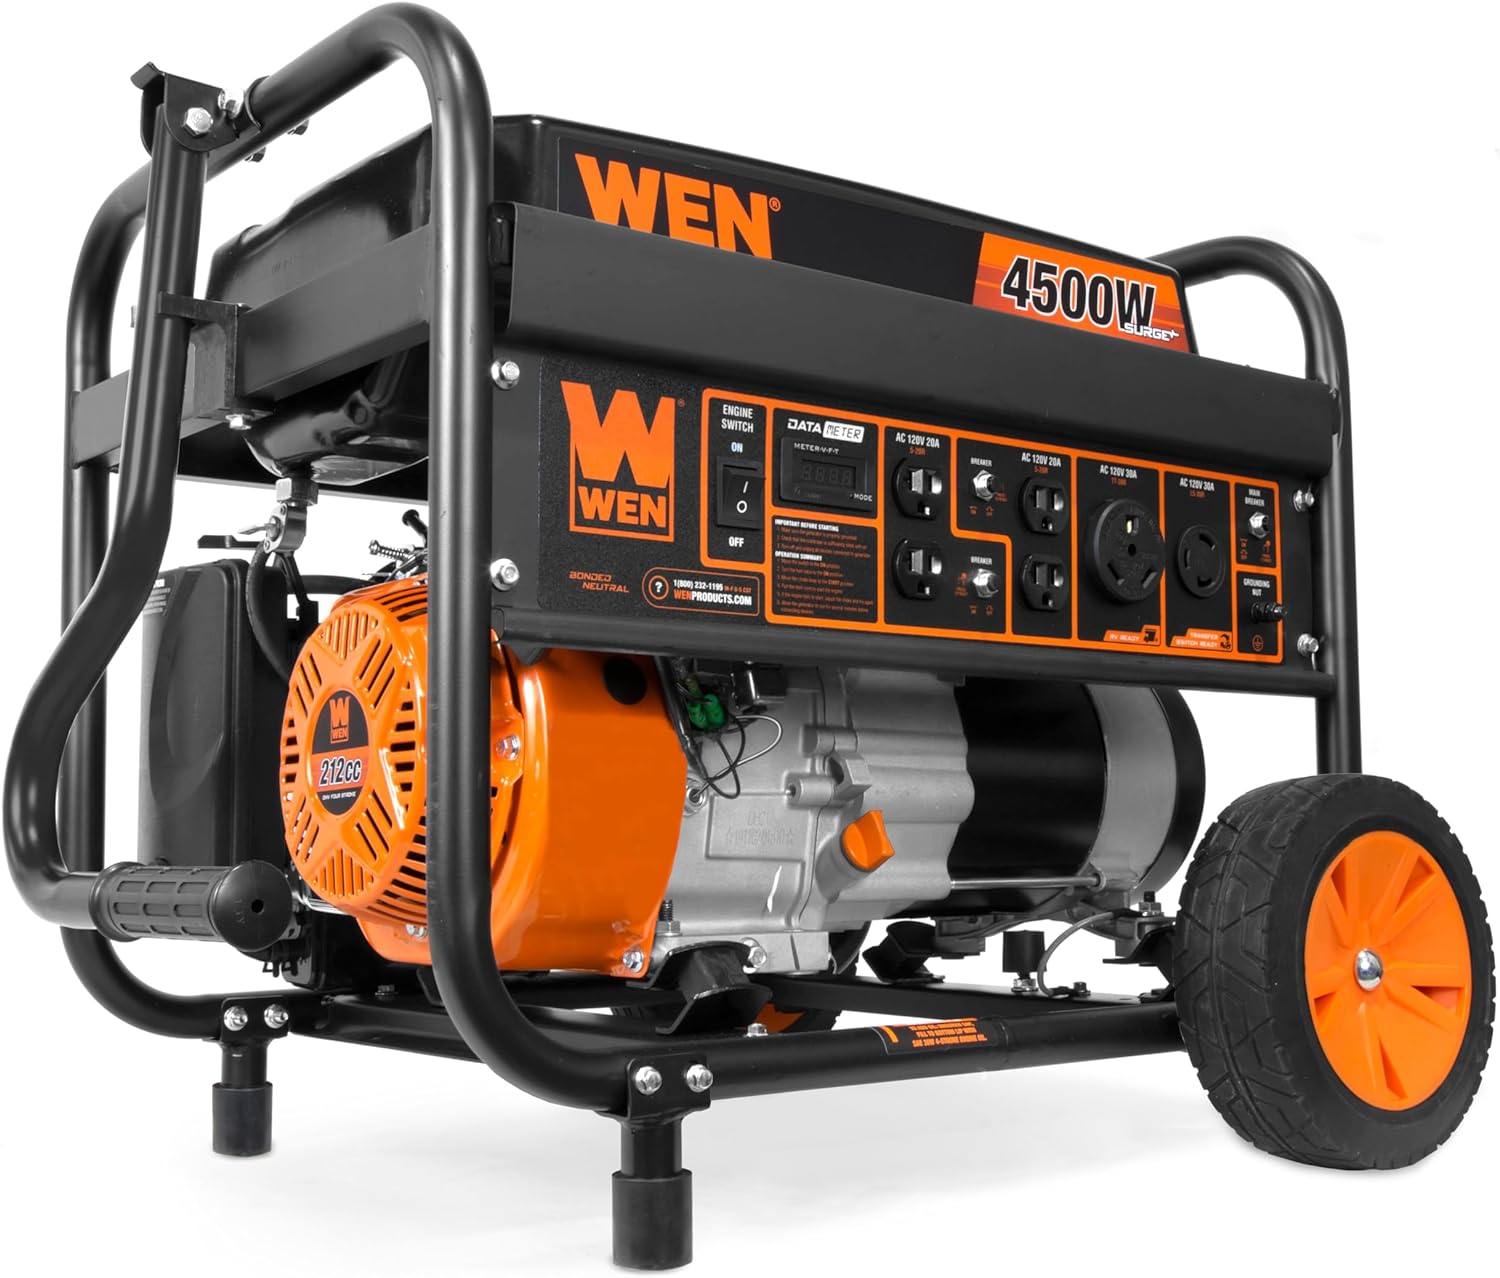 WEN GNA410 Generator Wheel and Handle Kit for WEN 4500 and 4750-Watt Generators (Black) - WEN GNA410 Generator Wheel Review